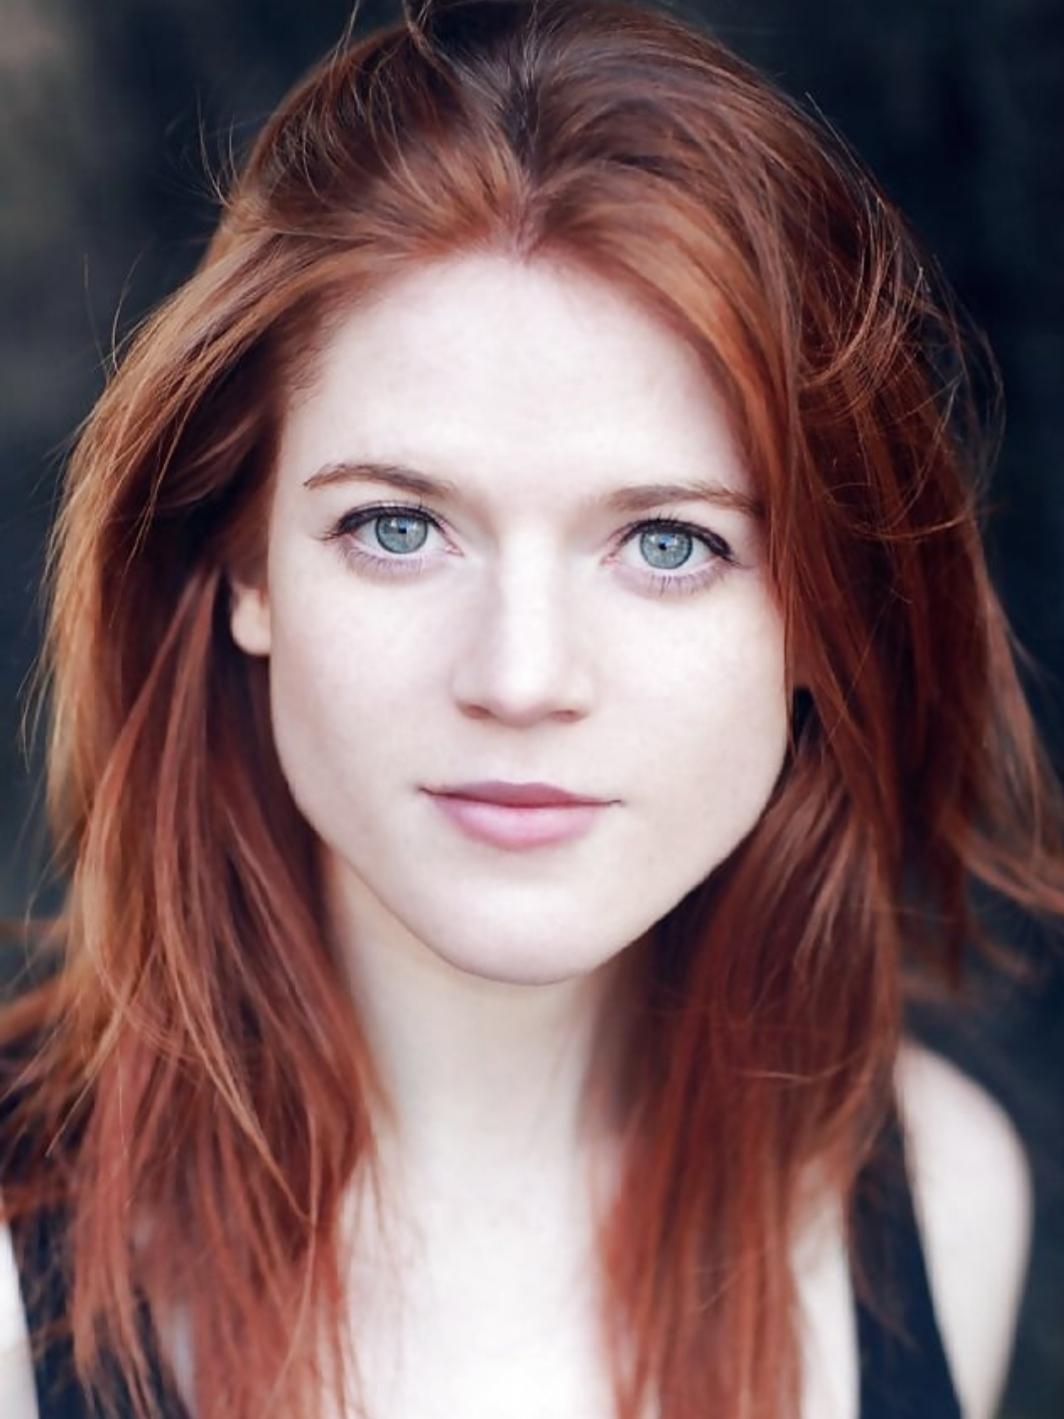 I wanna fuck Rose Leslie in any way possible